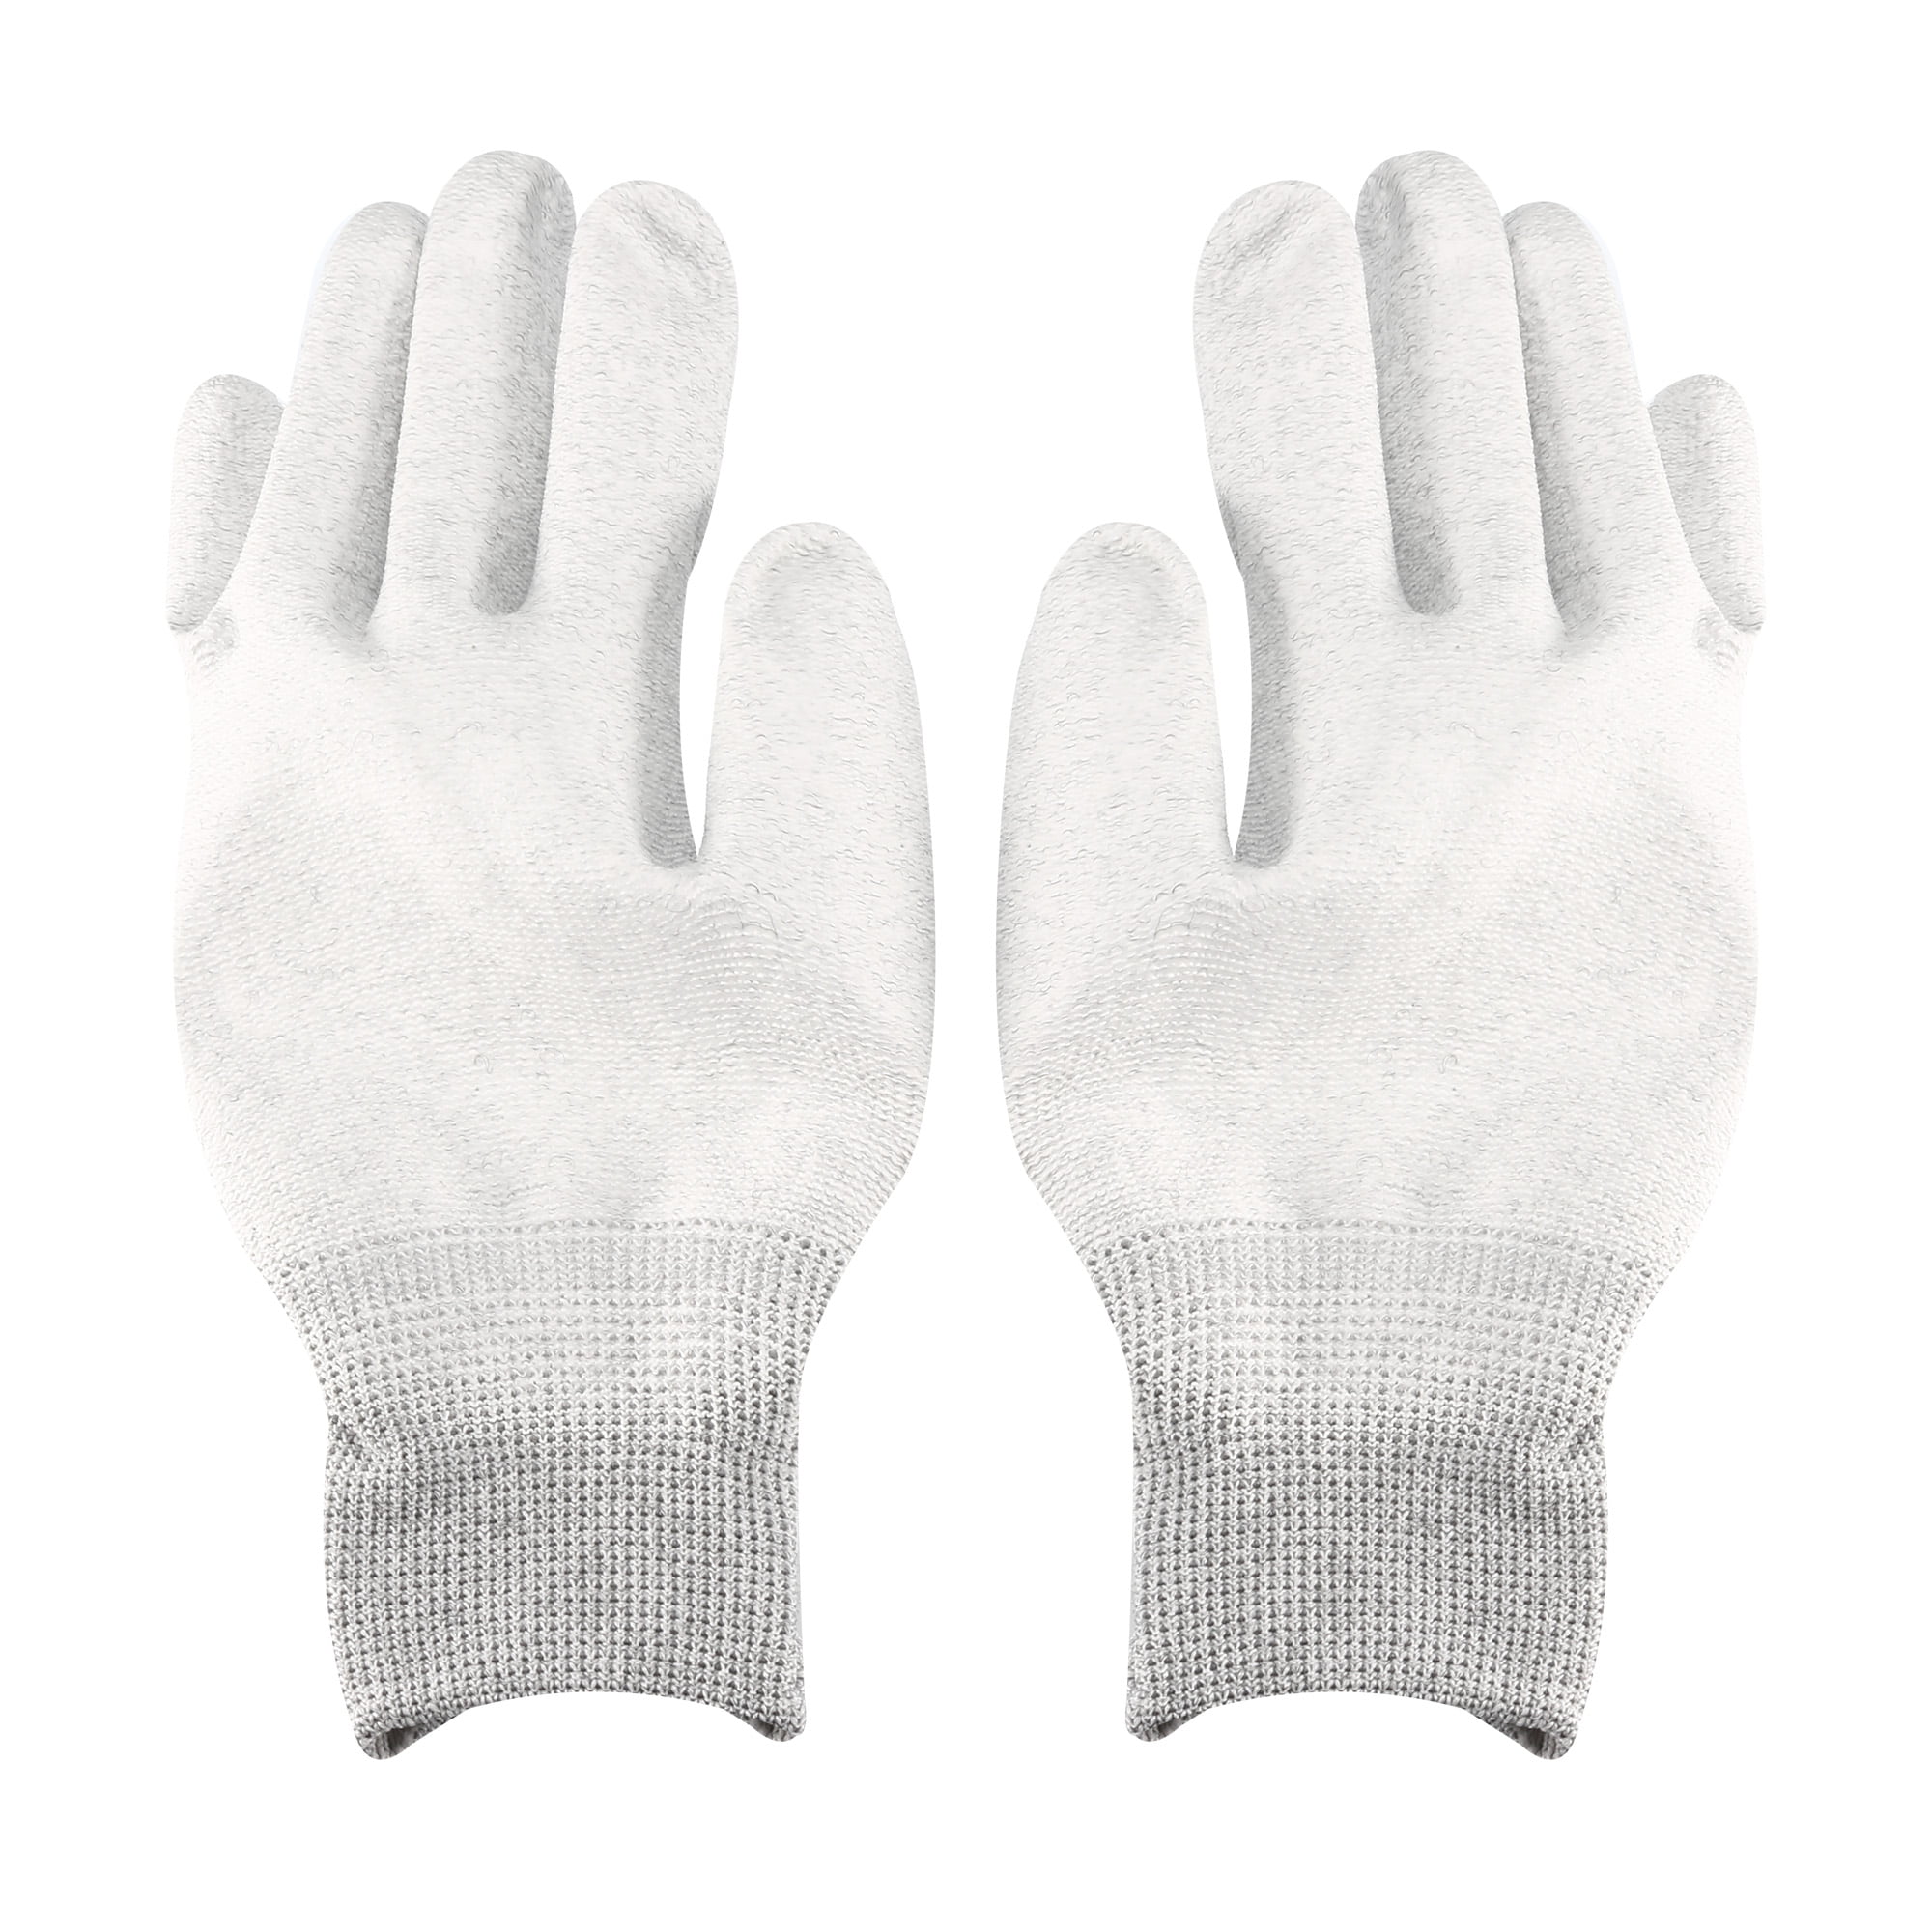 uxcell 1 Pair Microfiber Dust Proof Full Finger Working Protective Gloves White Large 